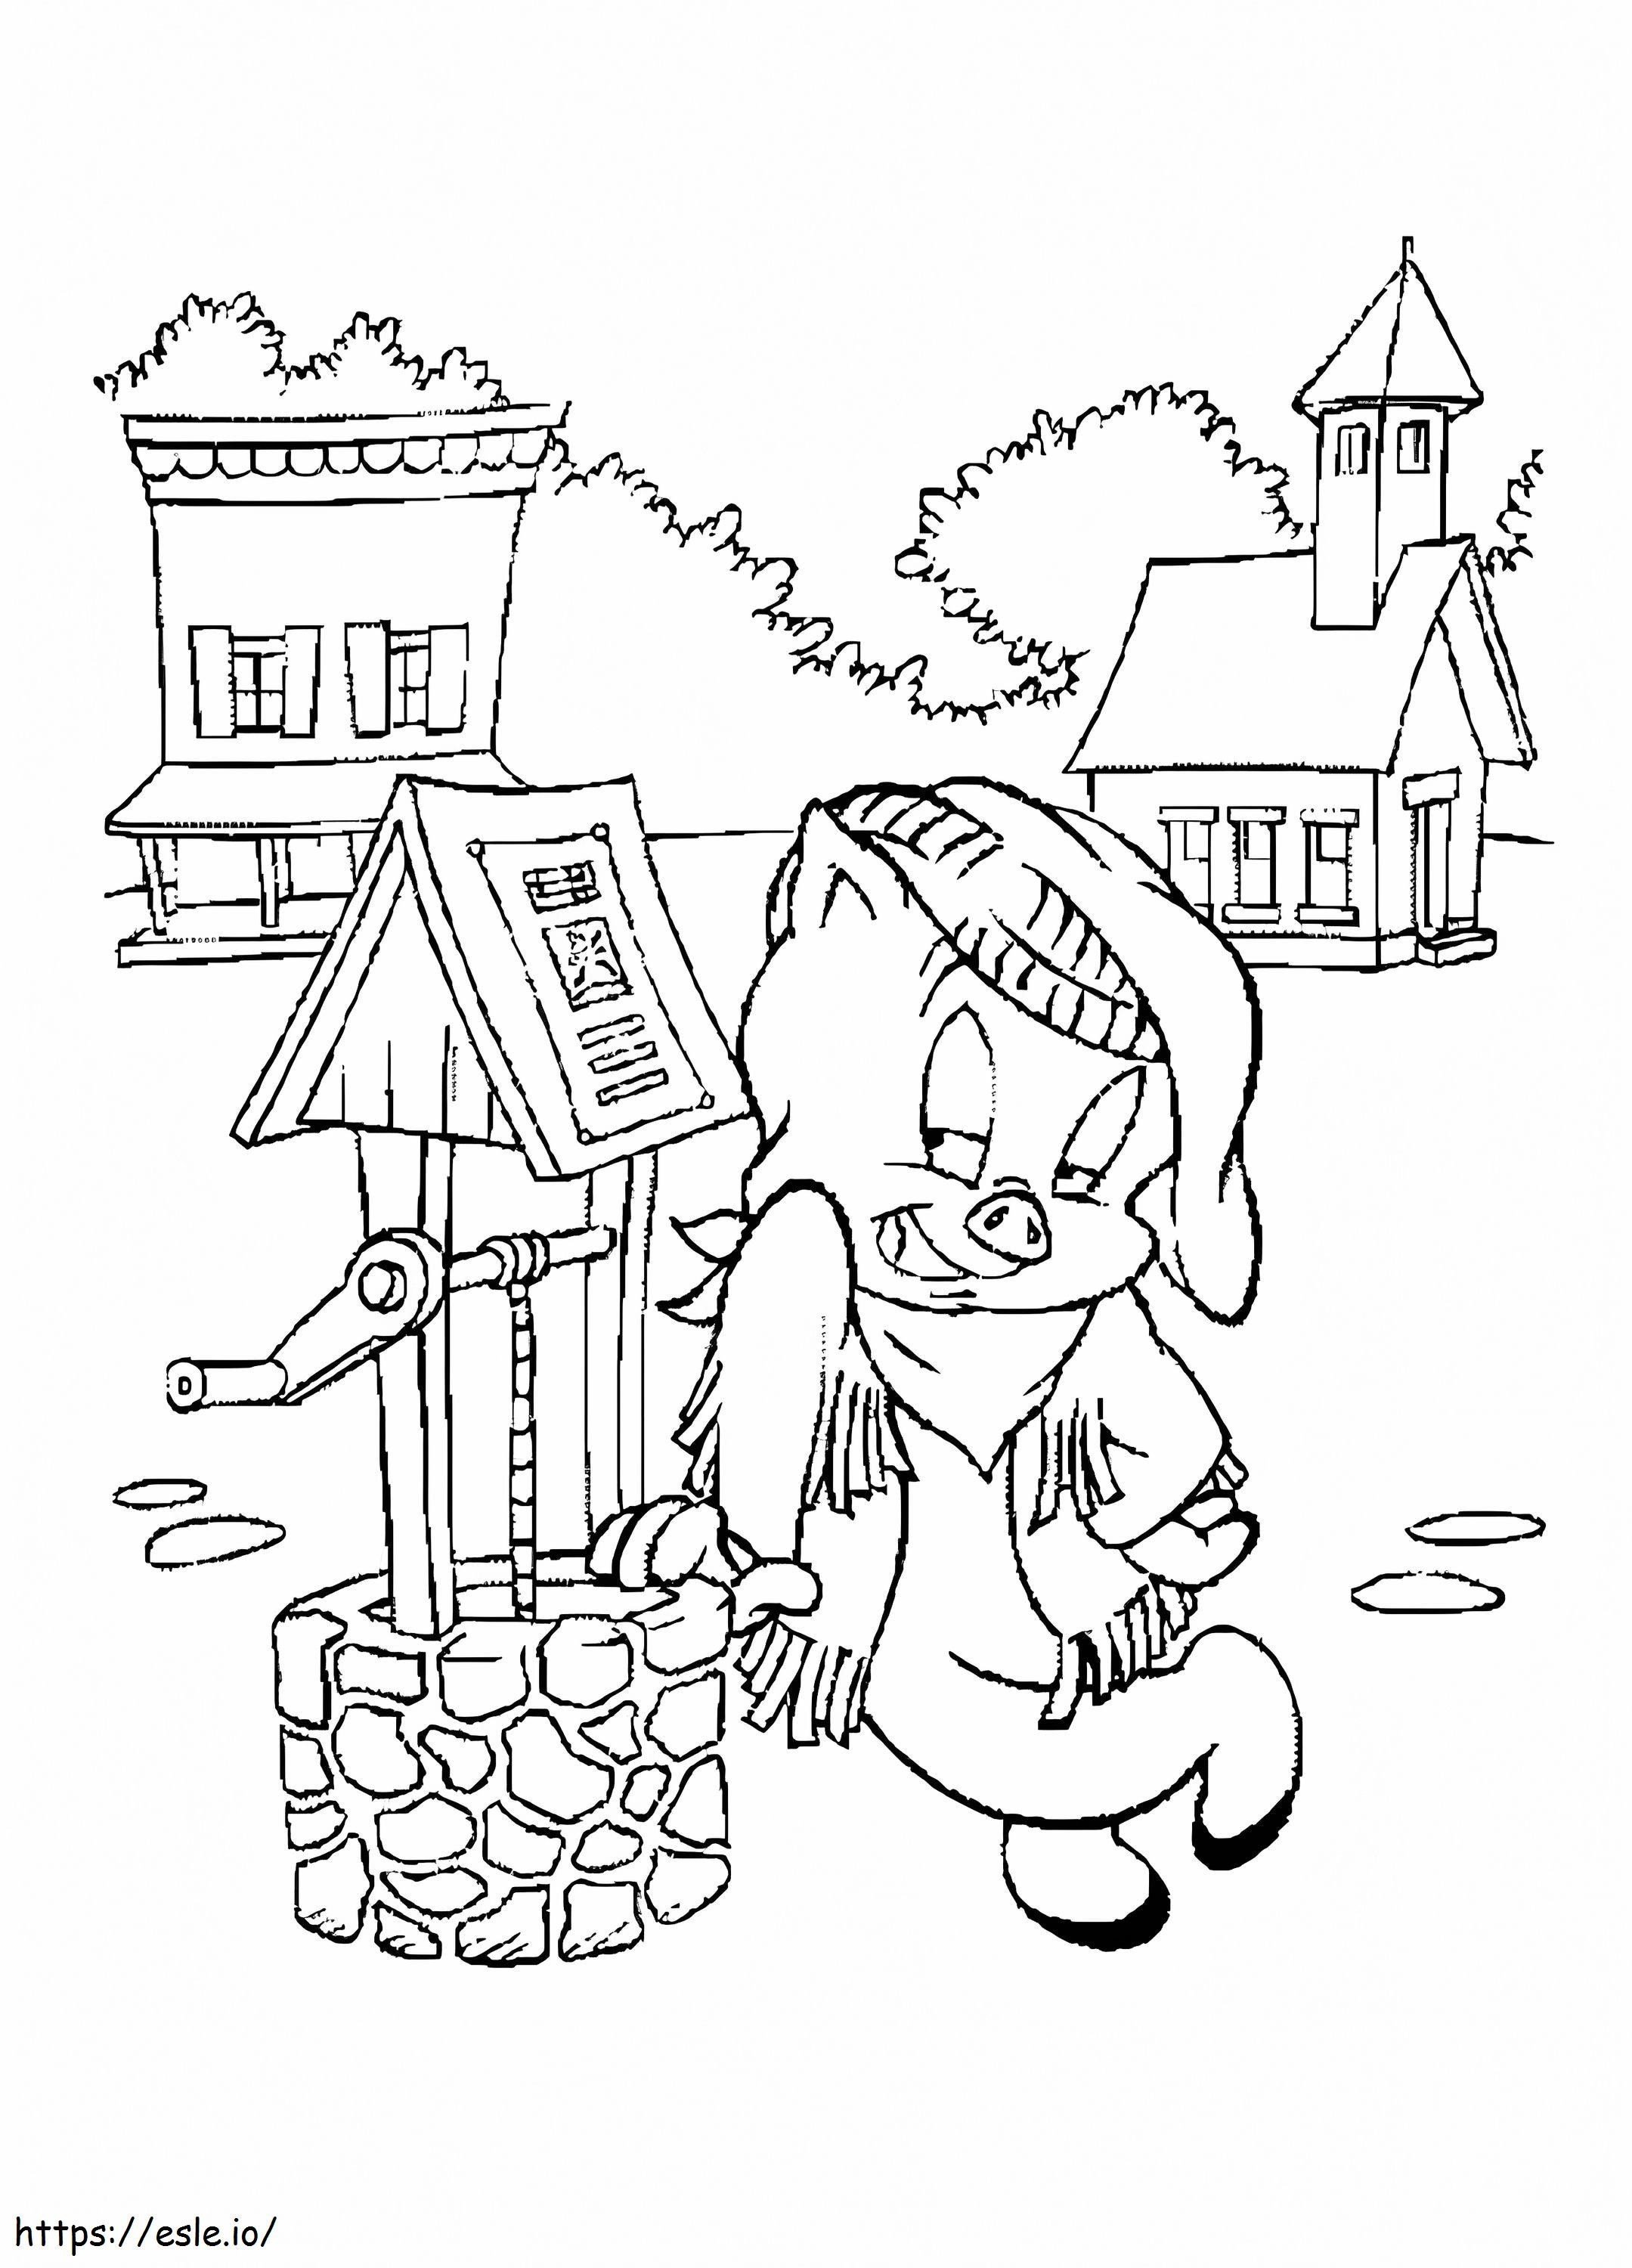 Funny Porky Pig coloring page